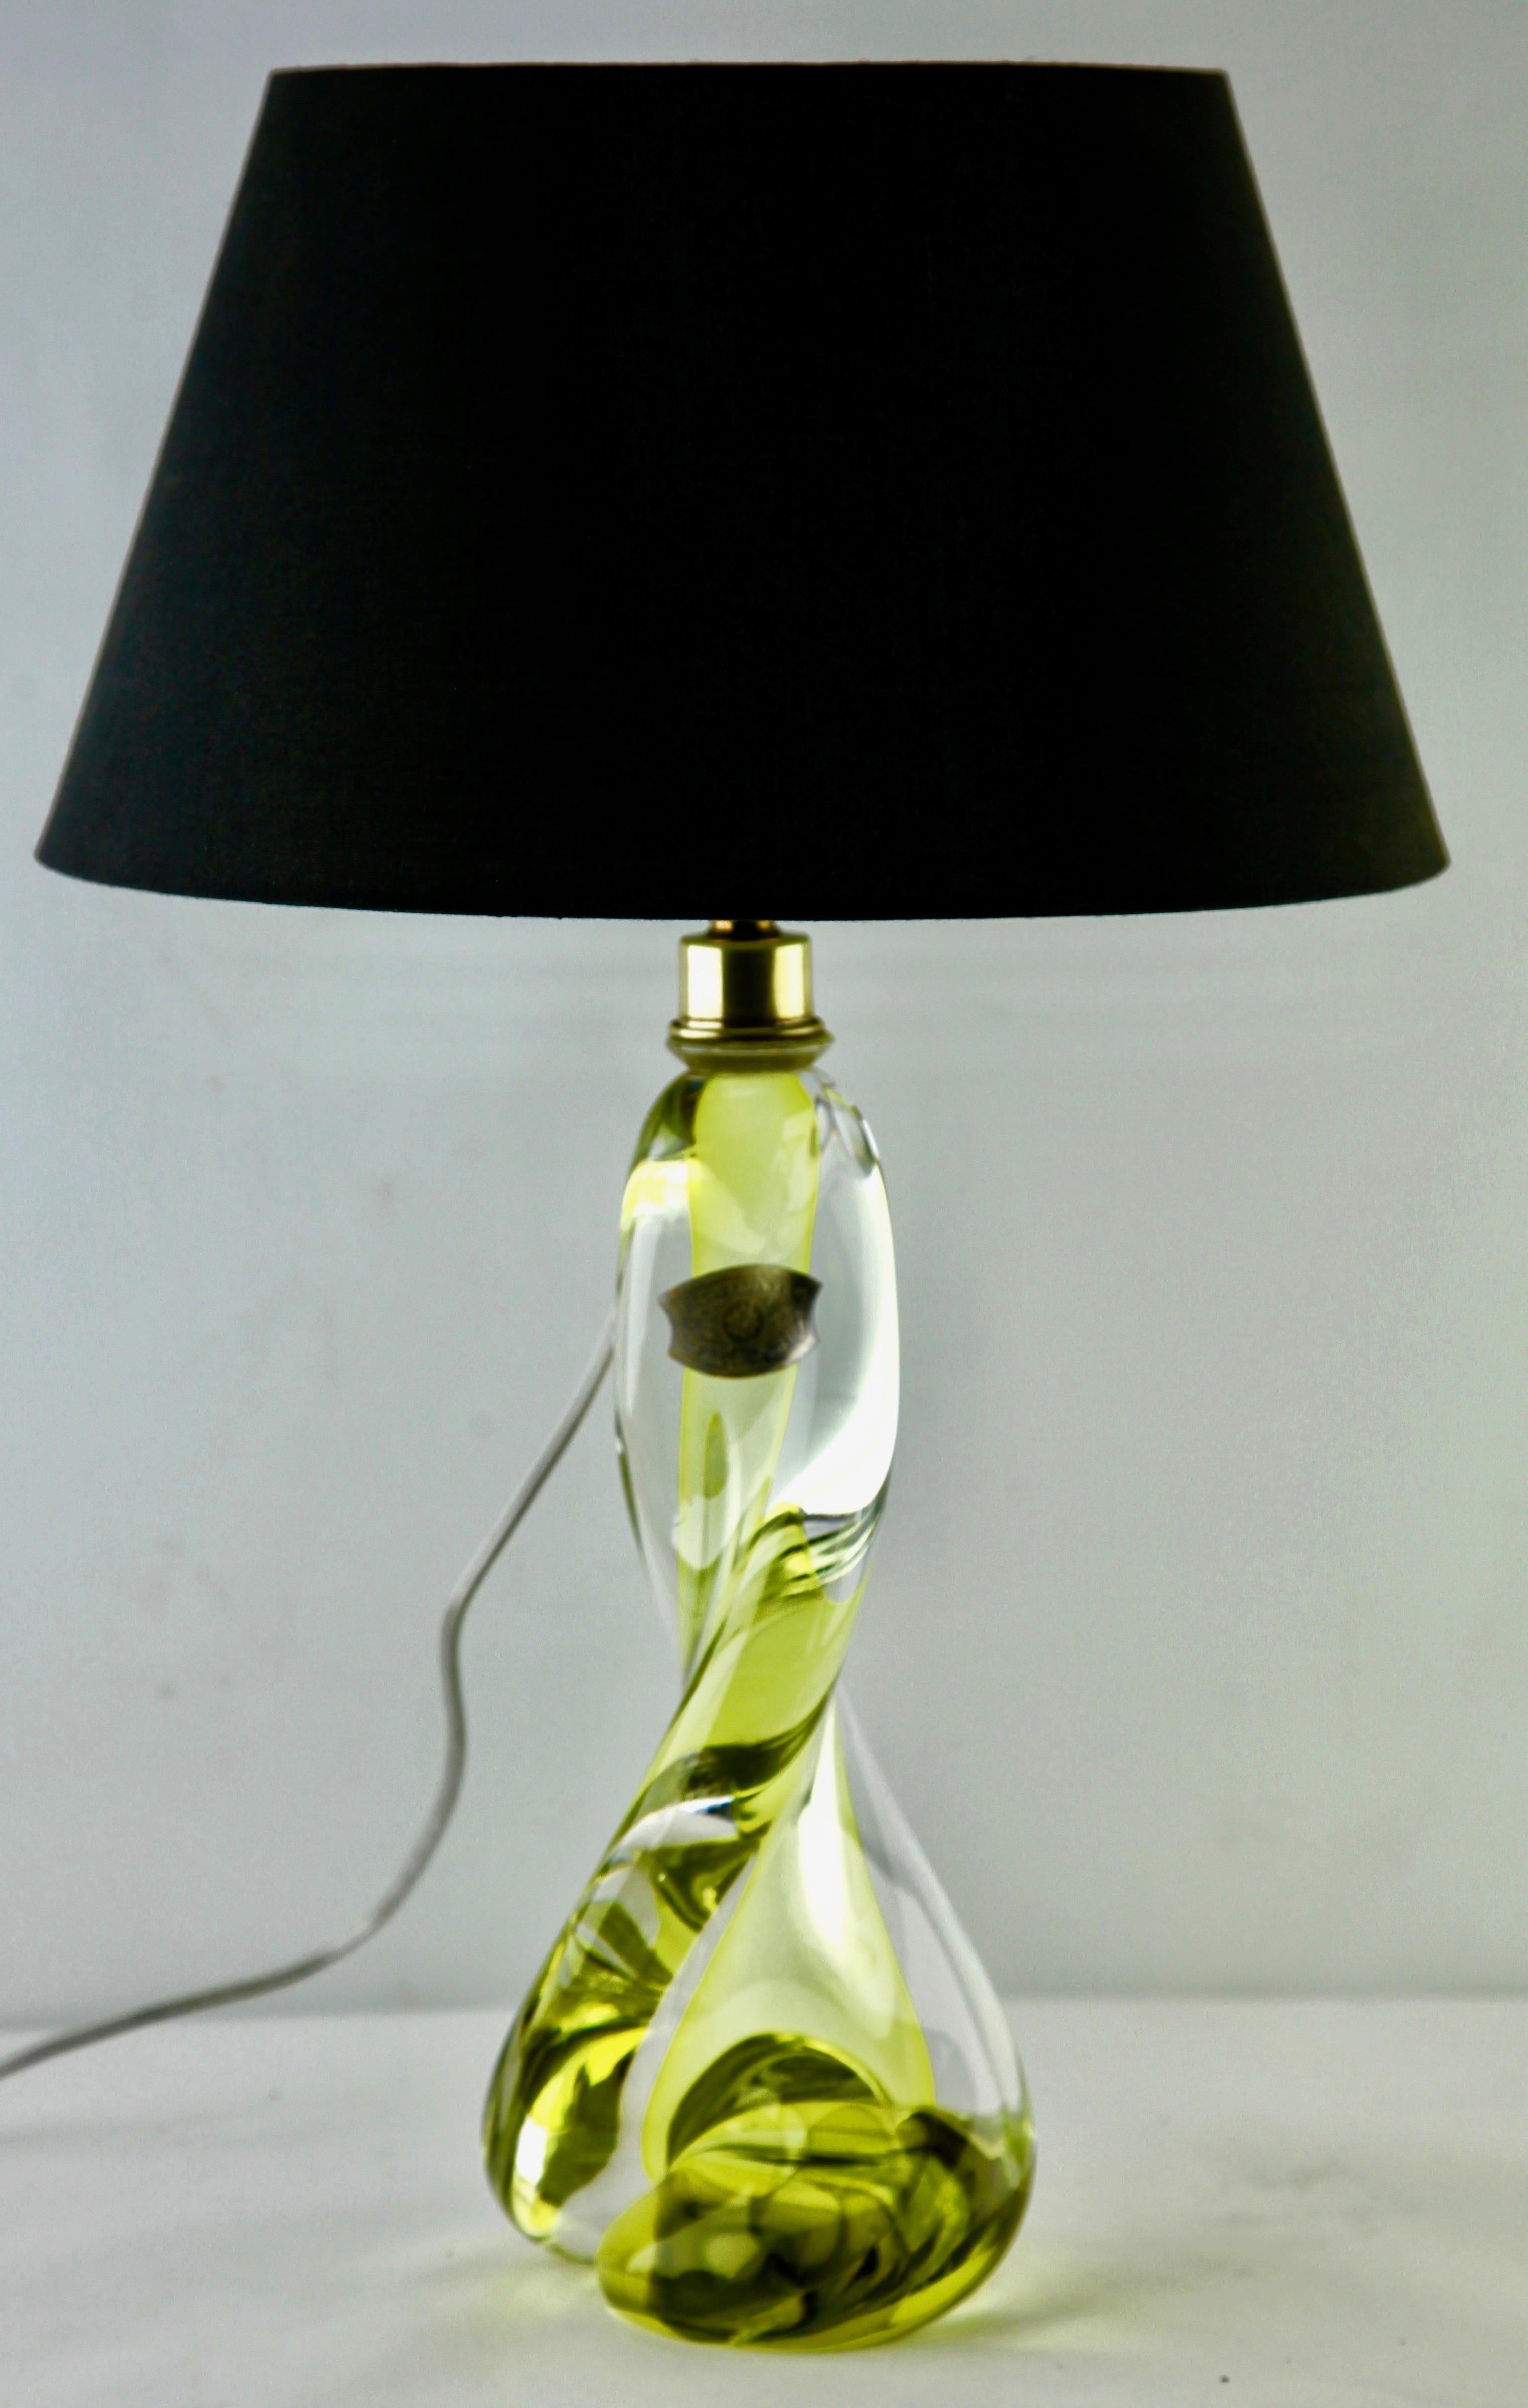 Set Val Saint-Lambert whit Label

This simple yet graceful green table lamp is in medium size; 13.62 inches excluding the lamp-fitting and shade. The colored core in Classic Val Saint-Lambert tint, has been given a thick Sommerso (clear crystal